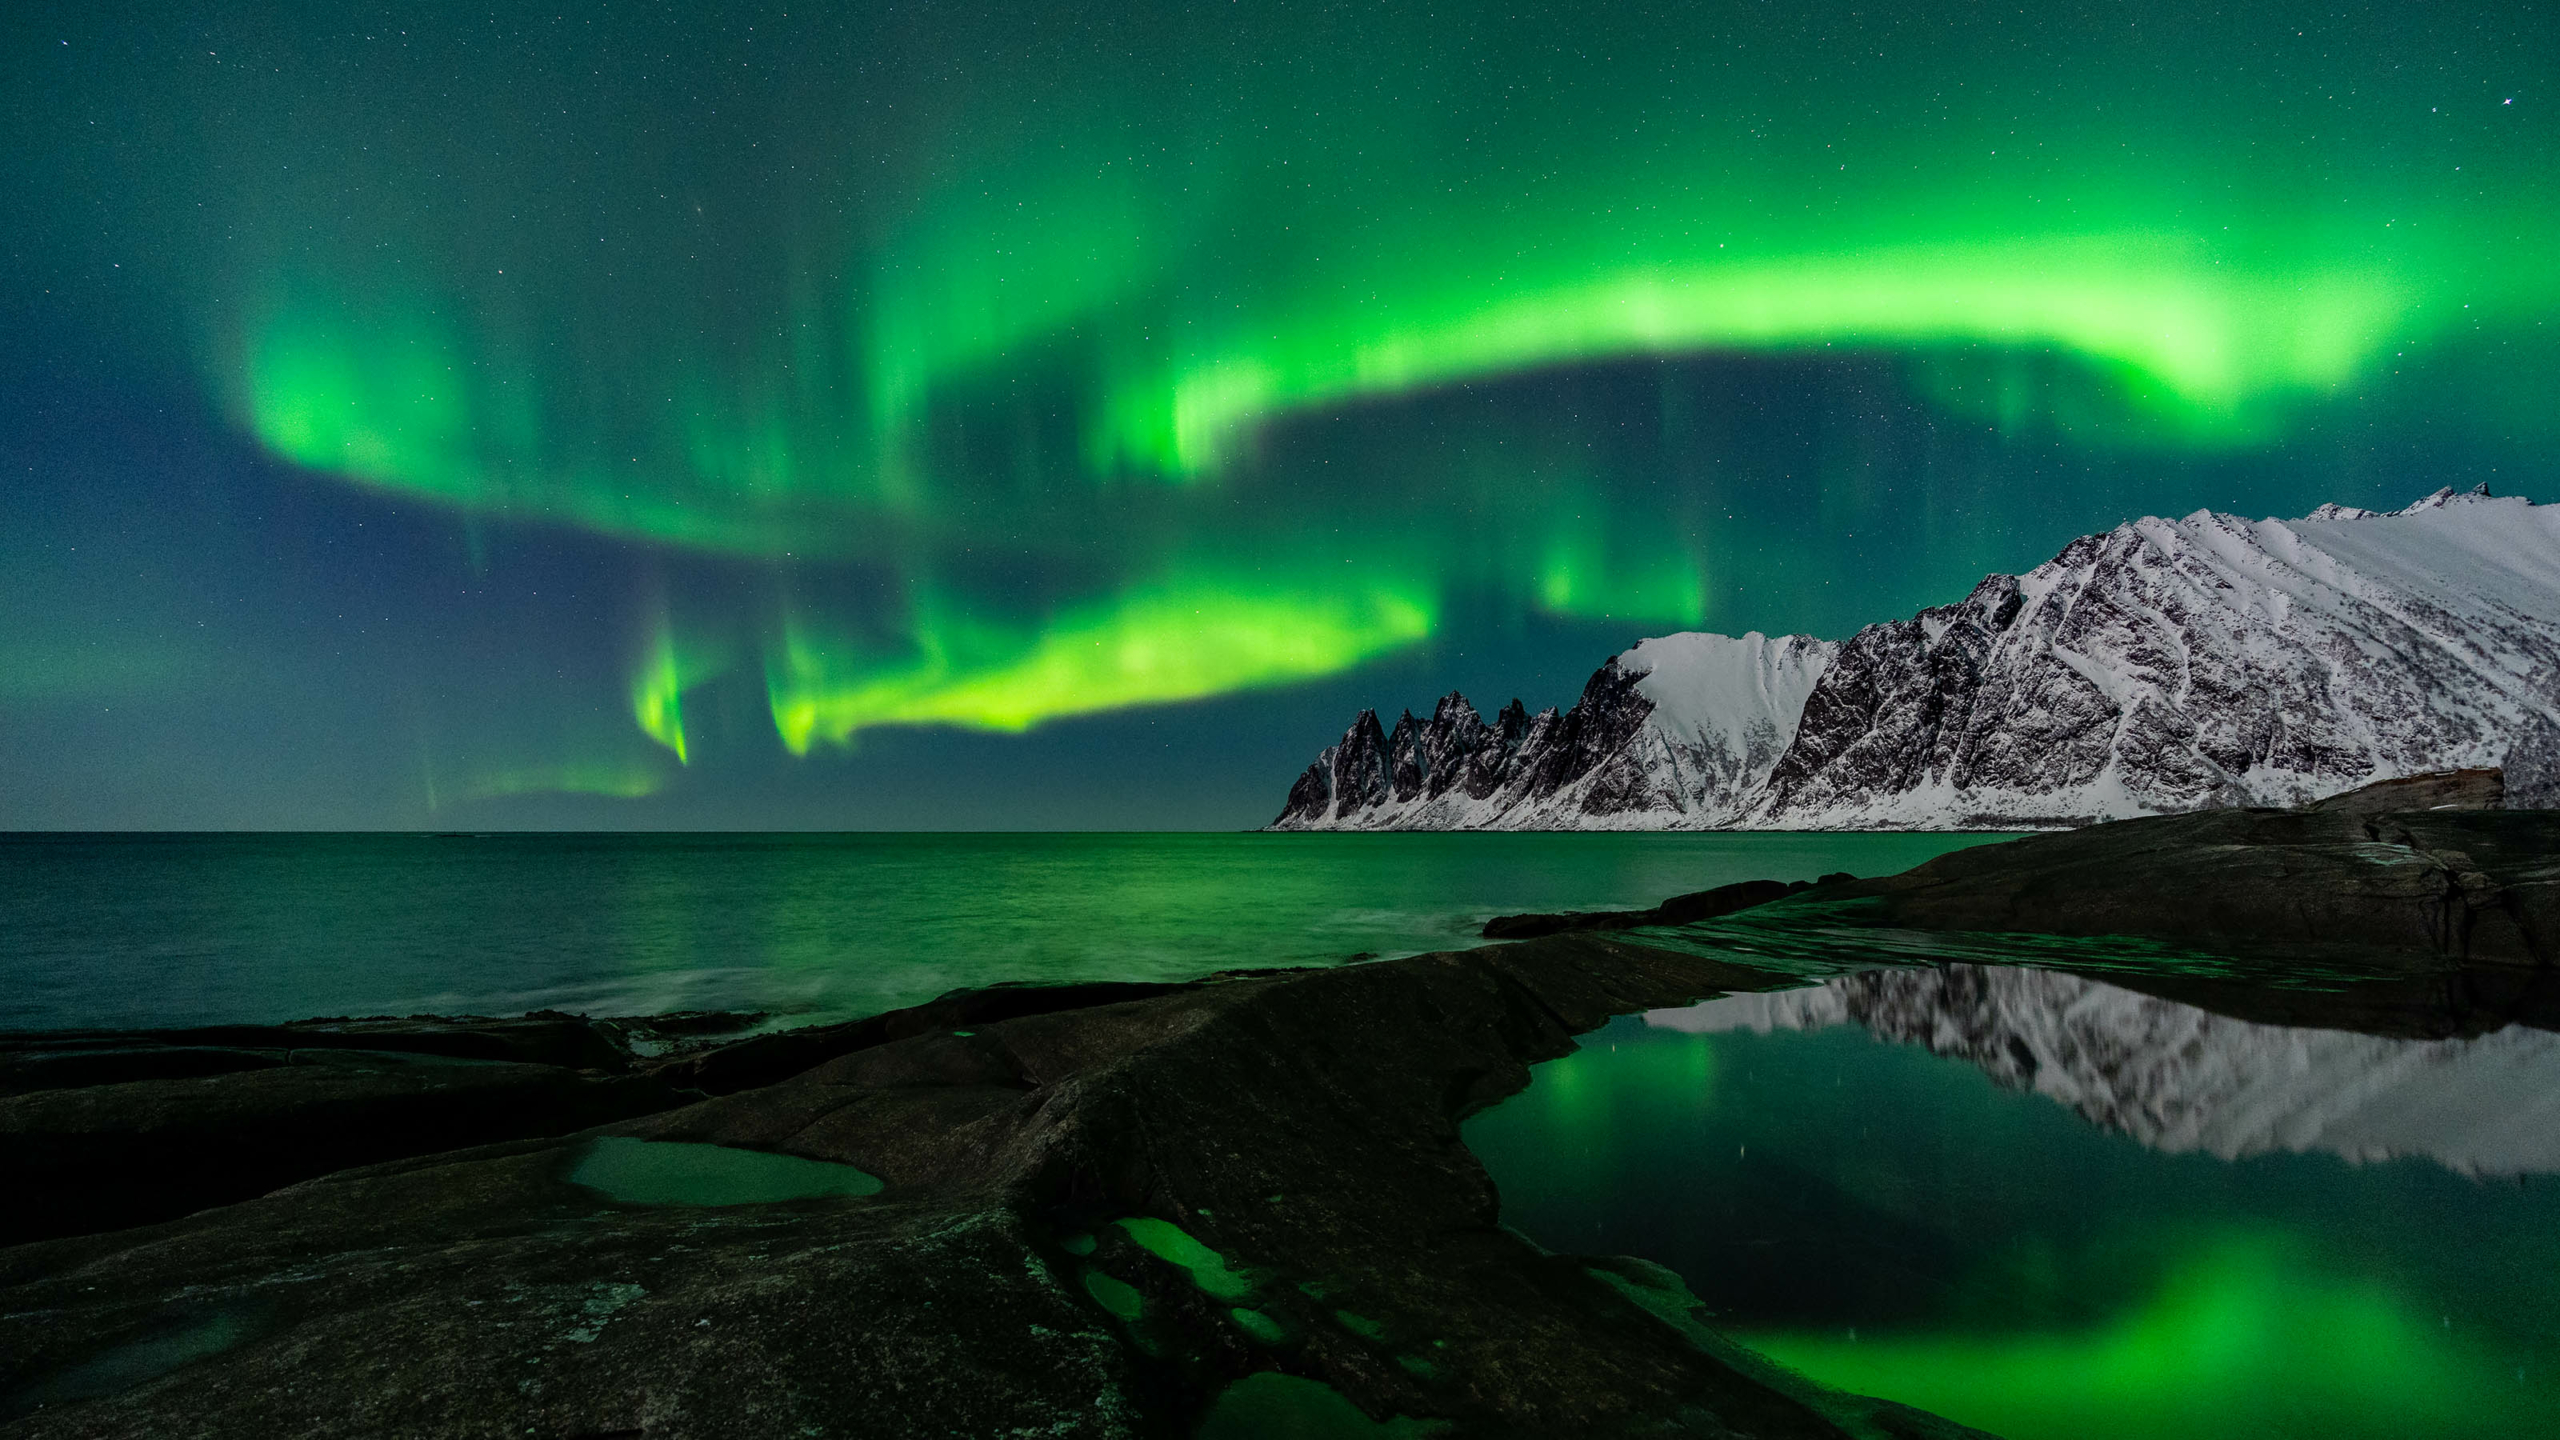 Magical Senja in Norway. Photo tour with Wild Nature Photo Adventures. Photo by Floris Smeets